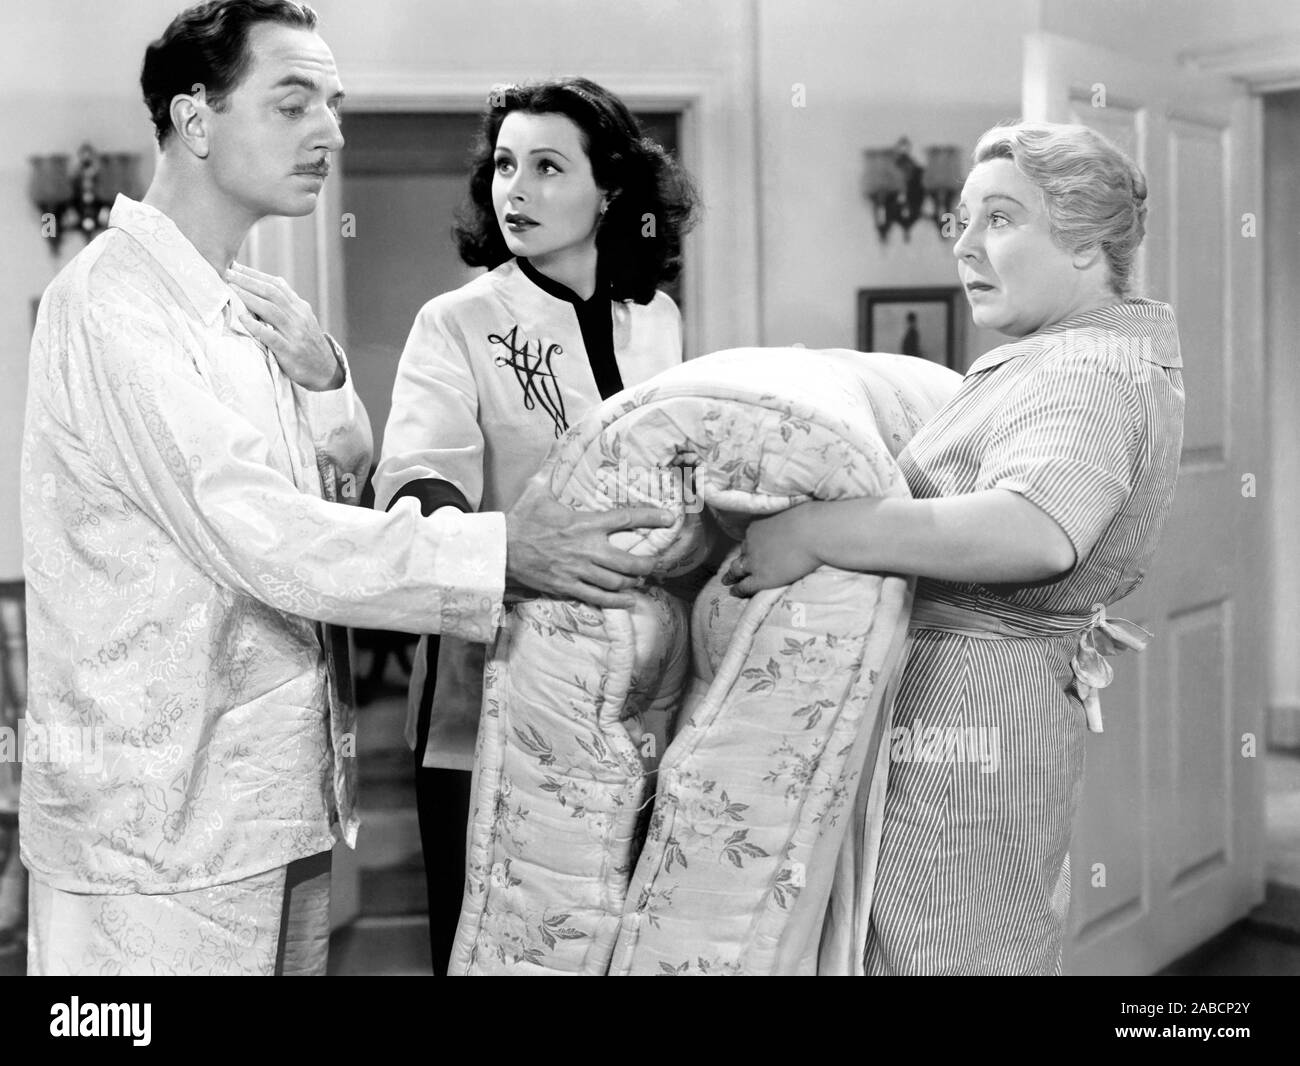 THE HEAVENLY BODY, from left, William Powell, Hedy Lamarr, Connie Gilchrist, 1944 Stock Photo